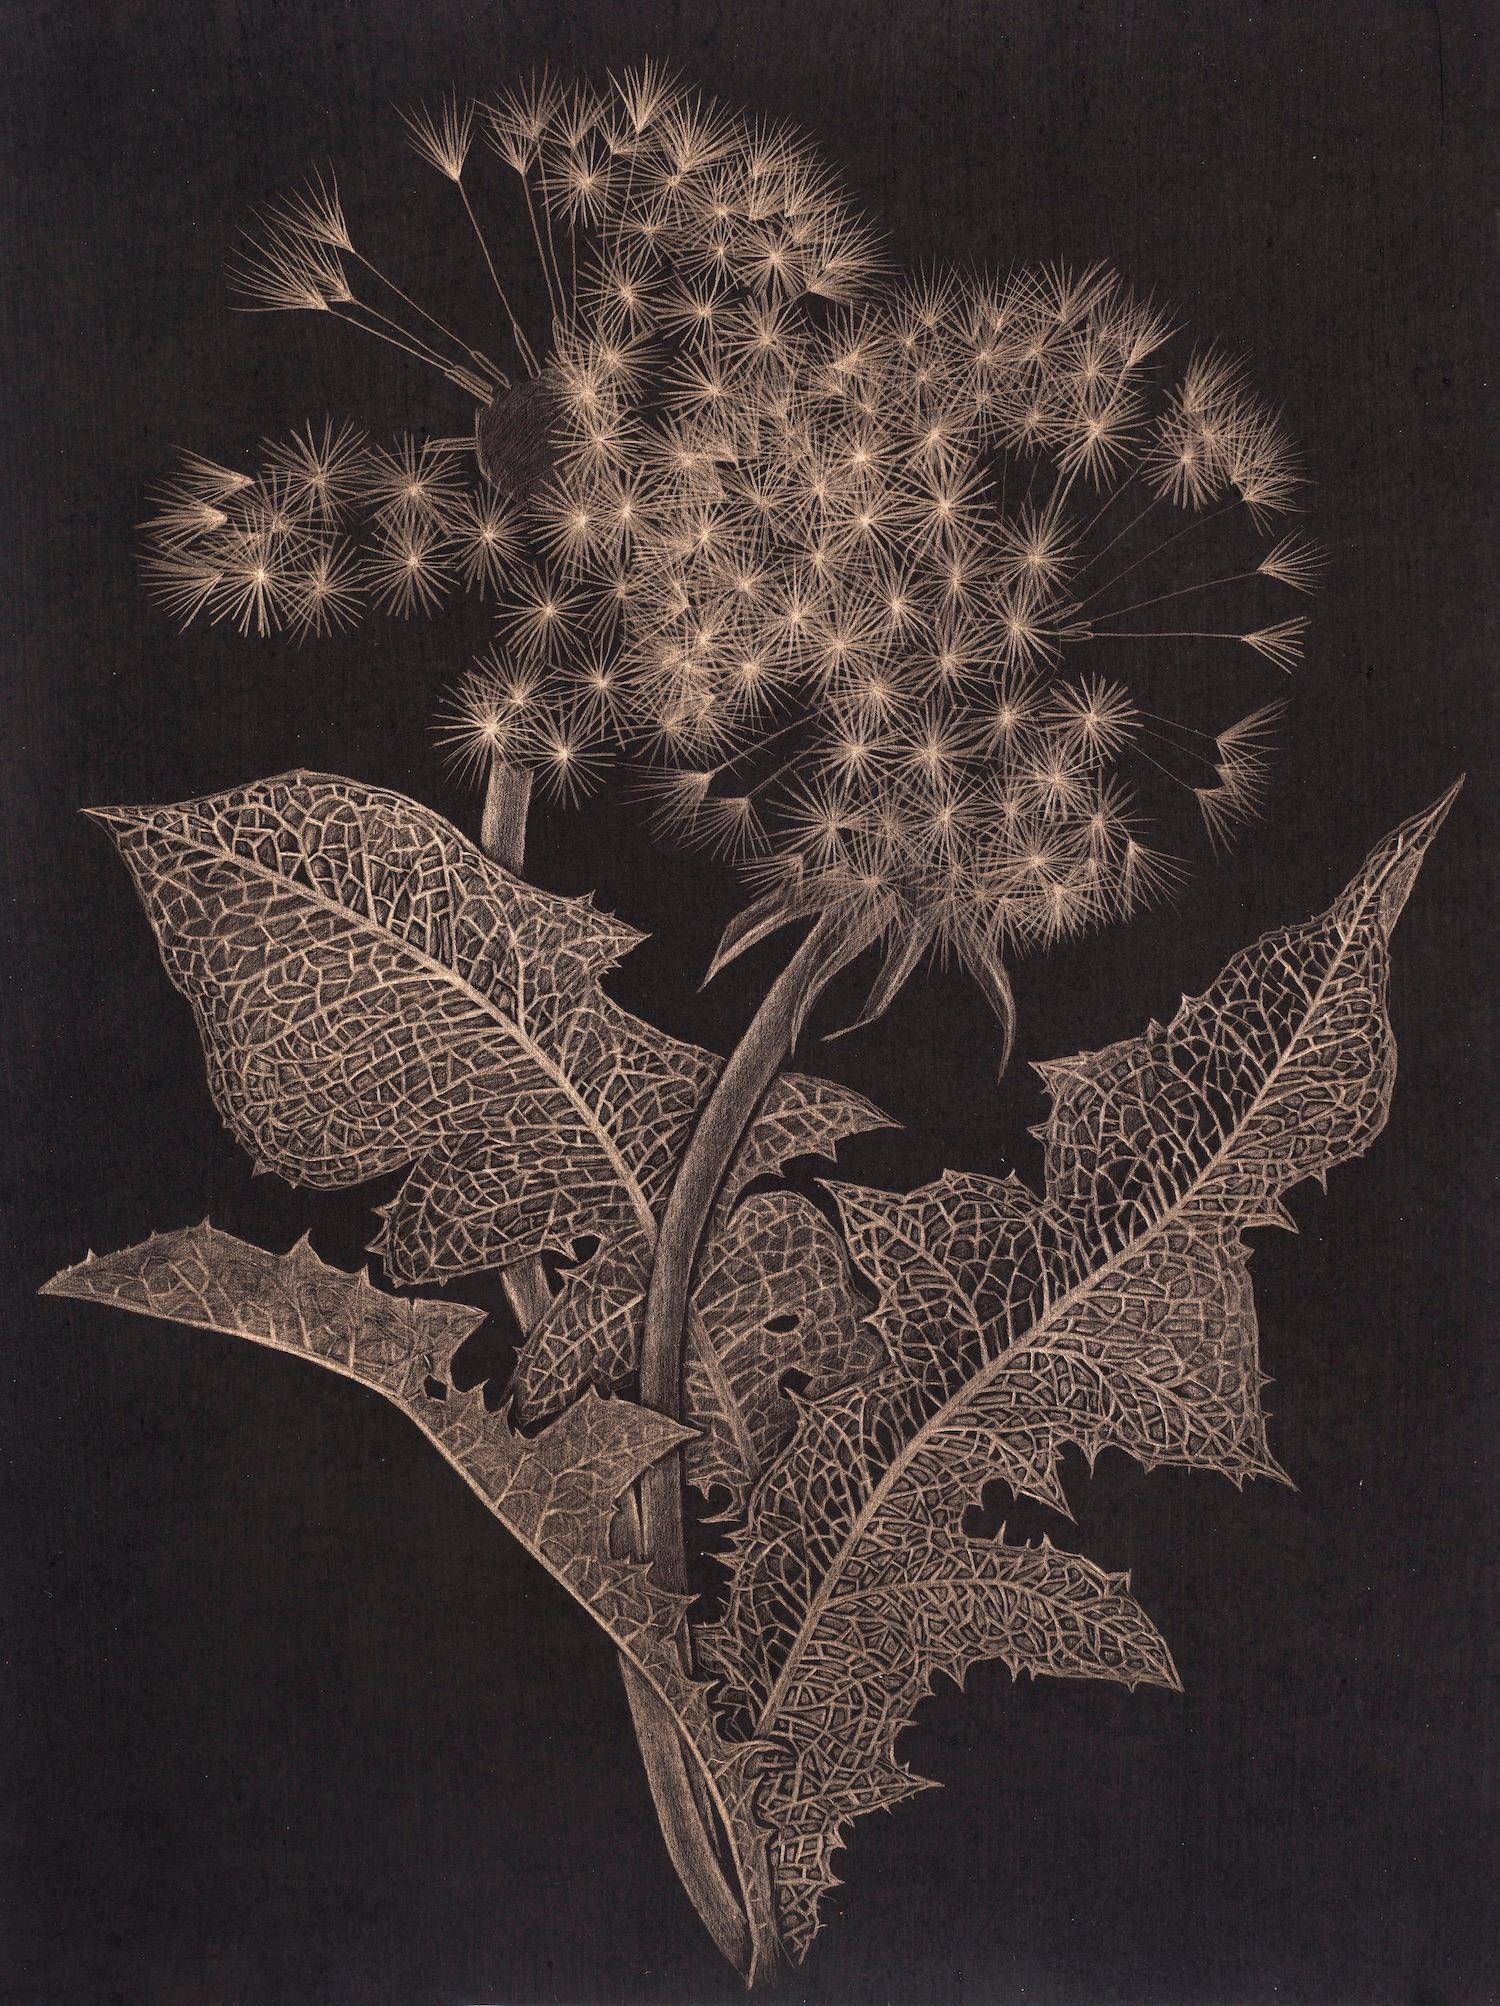 Margot Glass Landscape Art - Two Dandelions Three, Botanical Drawing on Black Paper made with 14K Gold